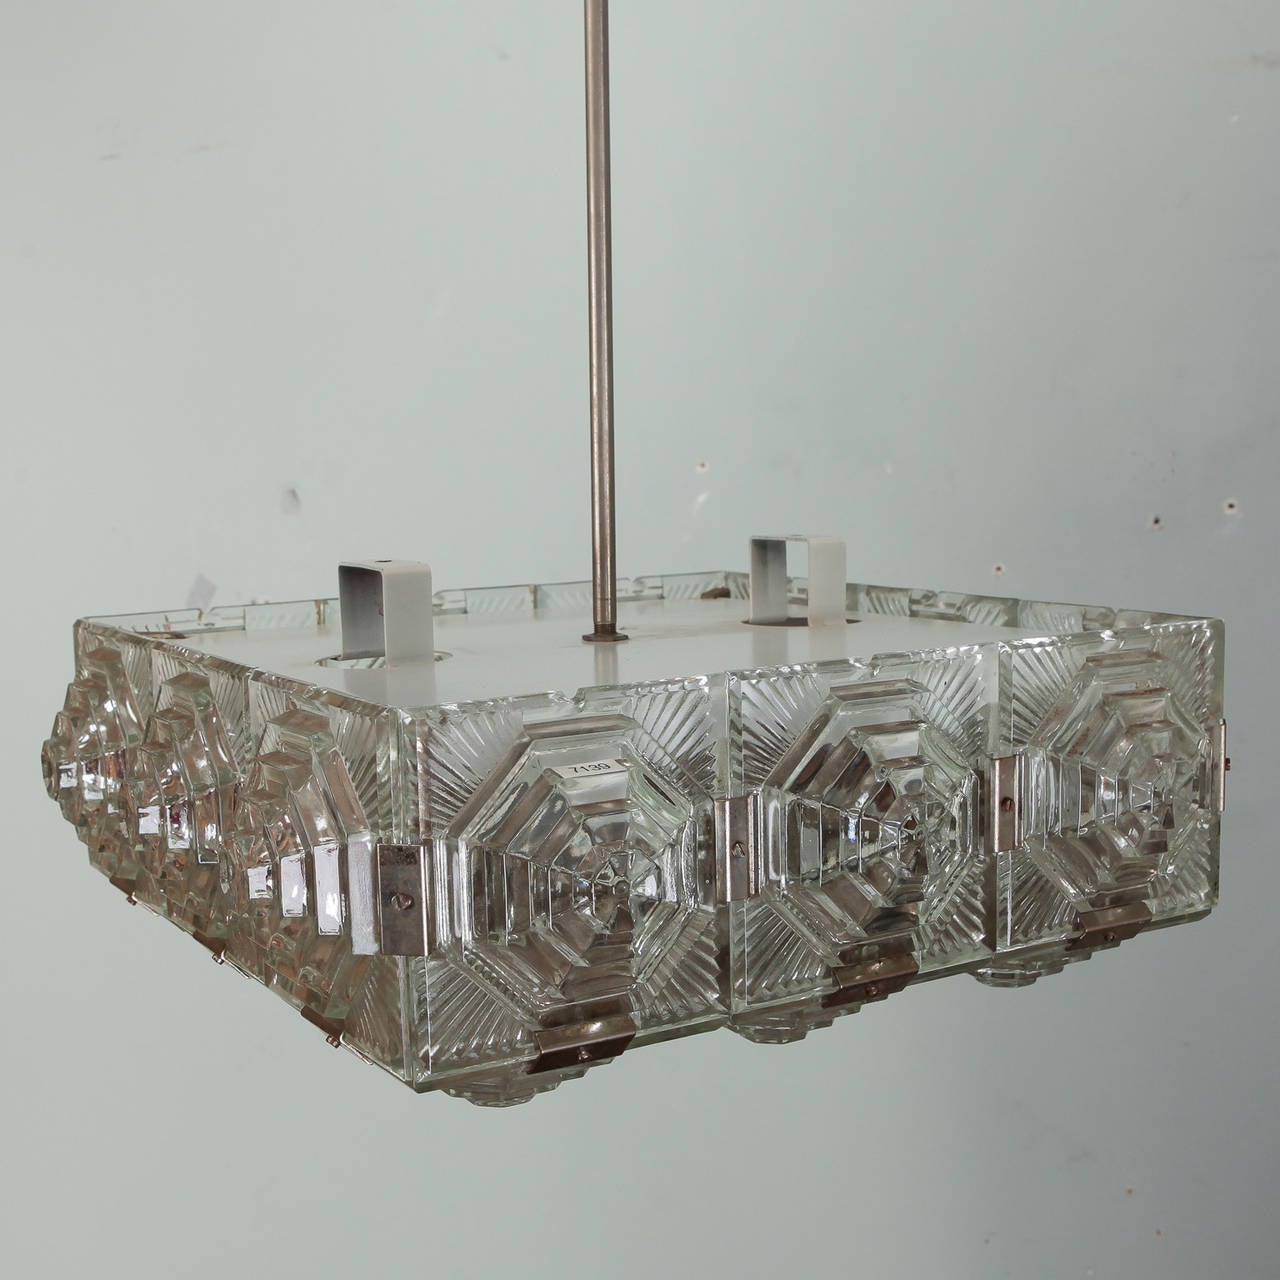 European Mid Century Hanging Fixture with Octagonal Dimensional Glass Panels